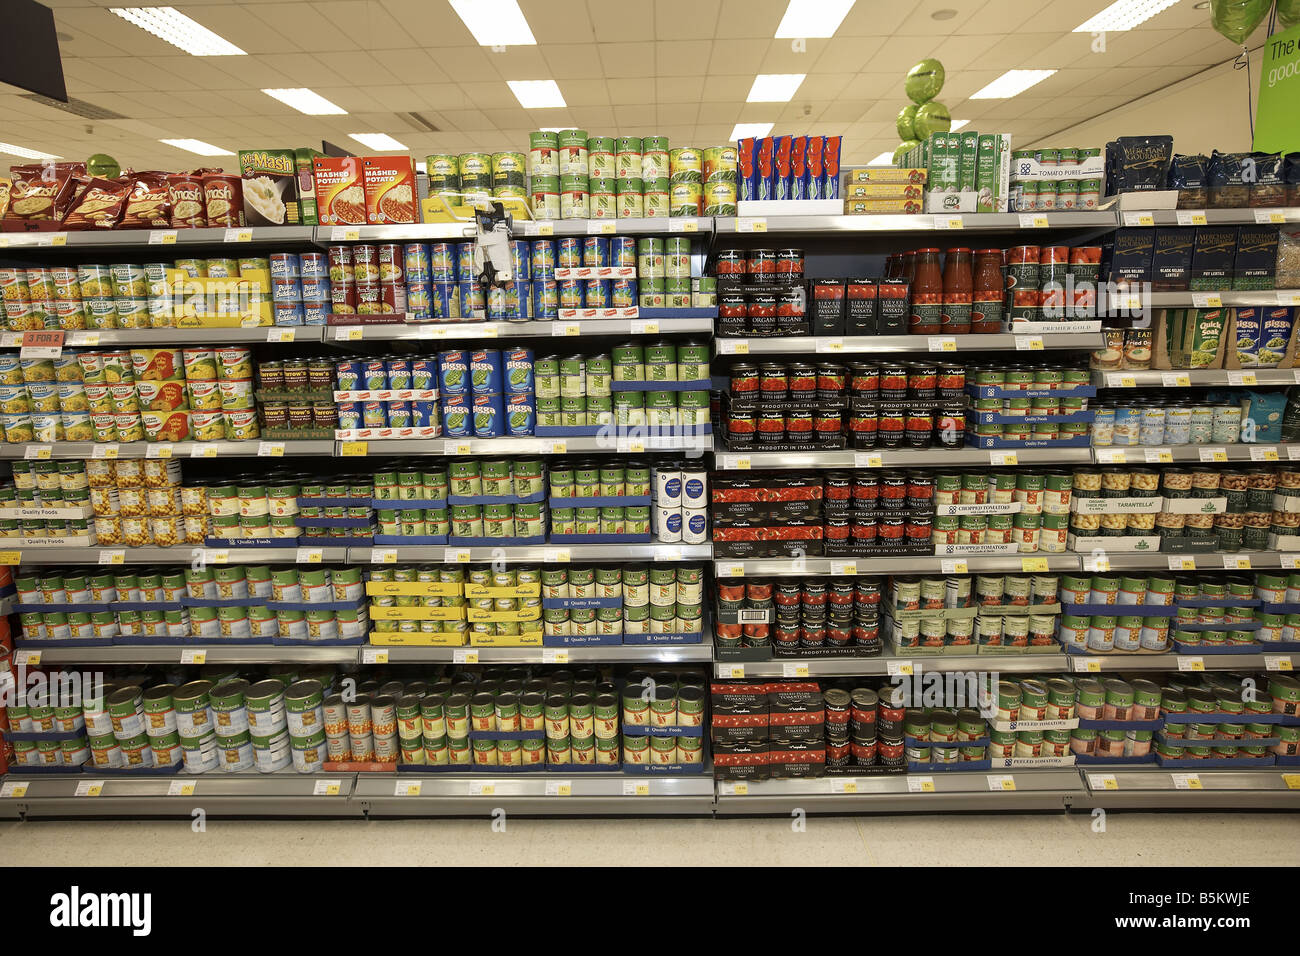 Canned tinned food stacked on supermarket shelves Supermarket interior Stock Photo